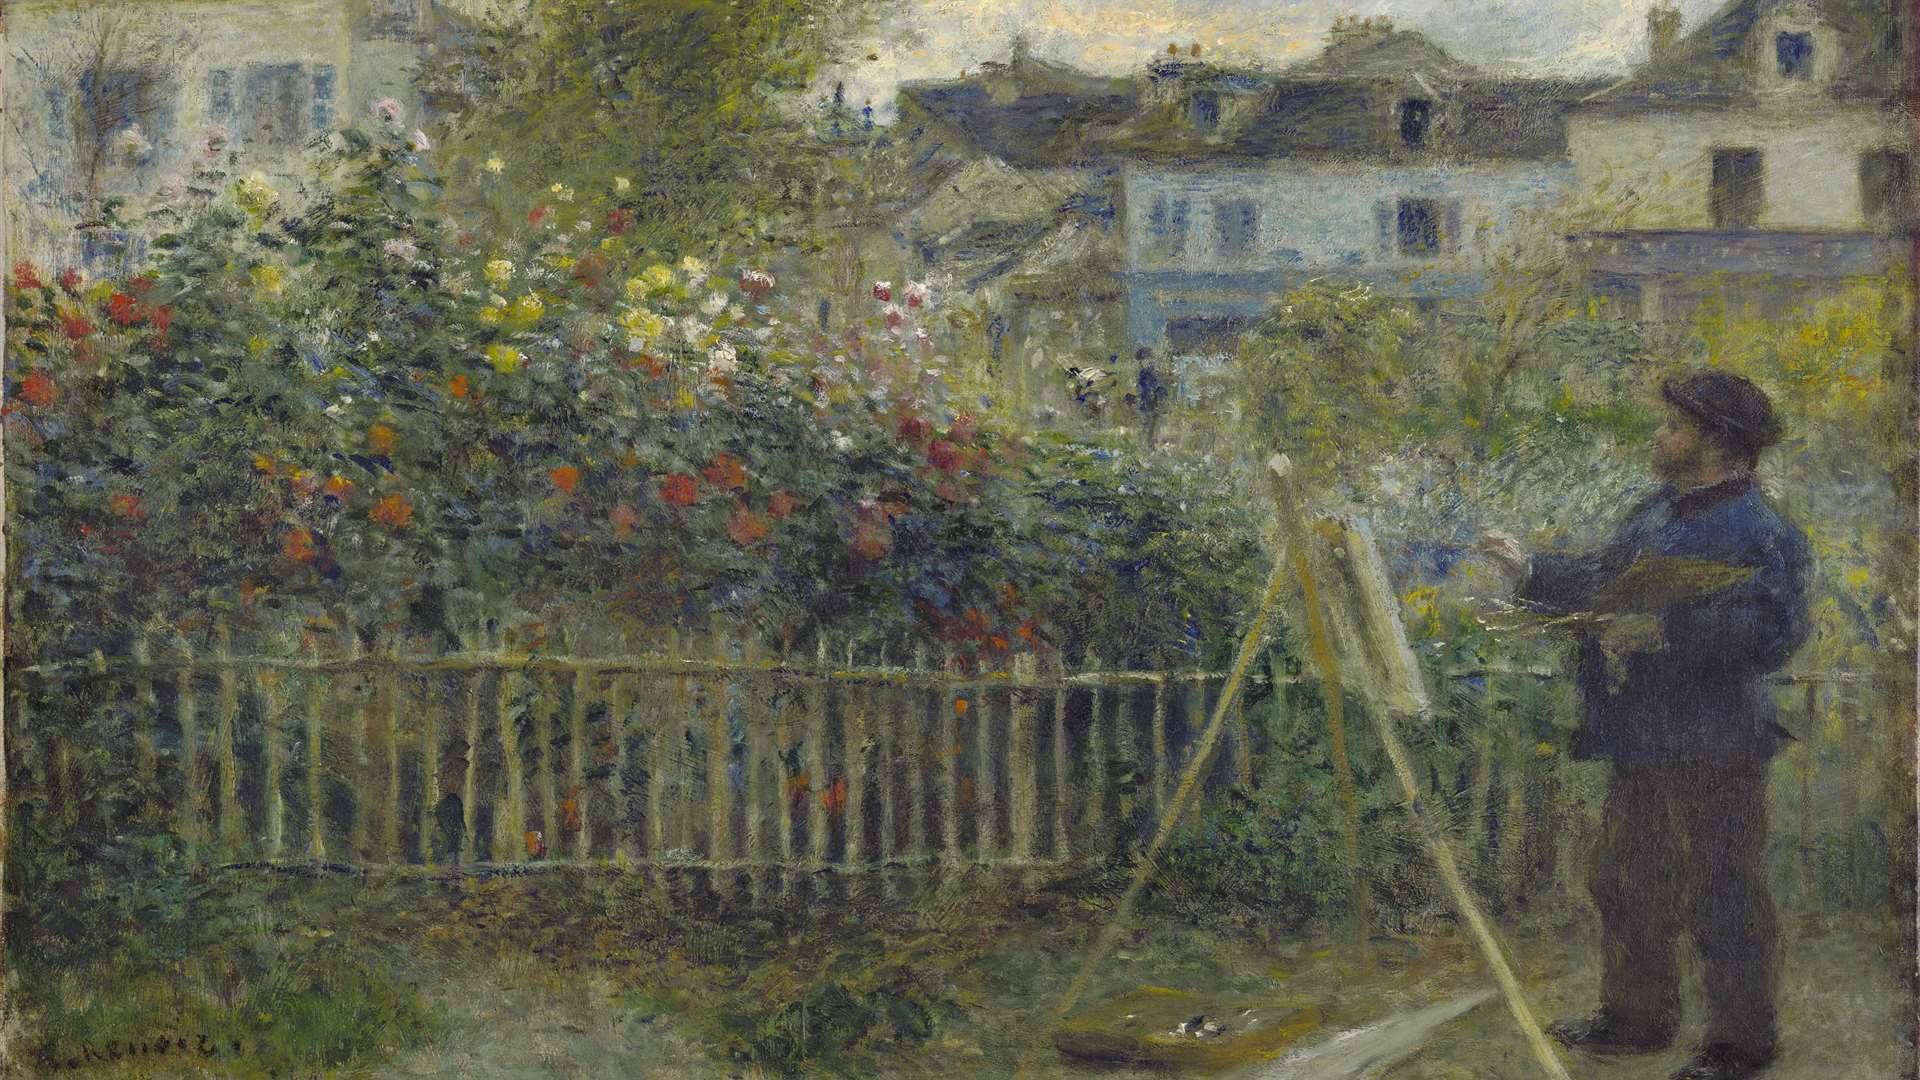 Monet Painting in His Garden at Argenteuil, 1873 by Auguste Renoir © Wadsworth Atheneum Museum of Art, Hartford